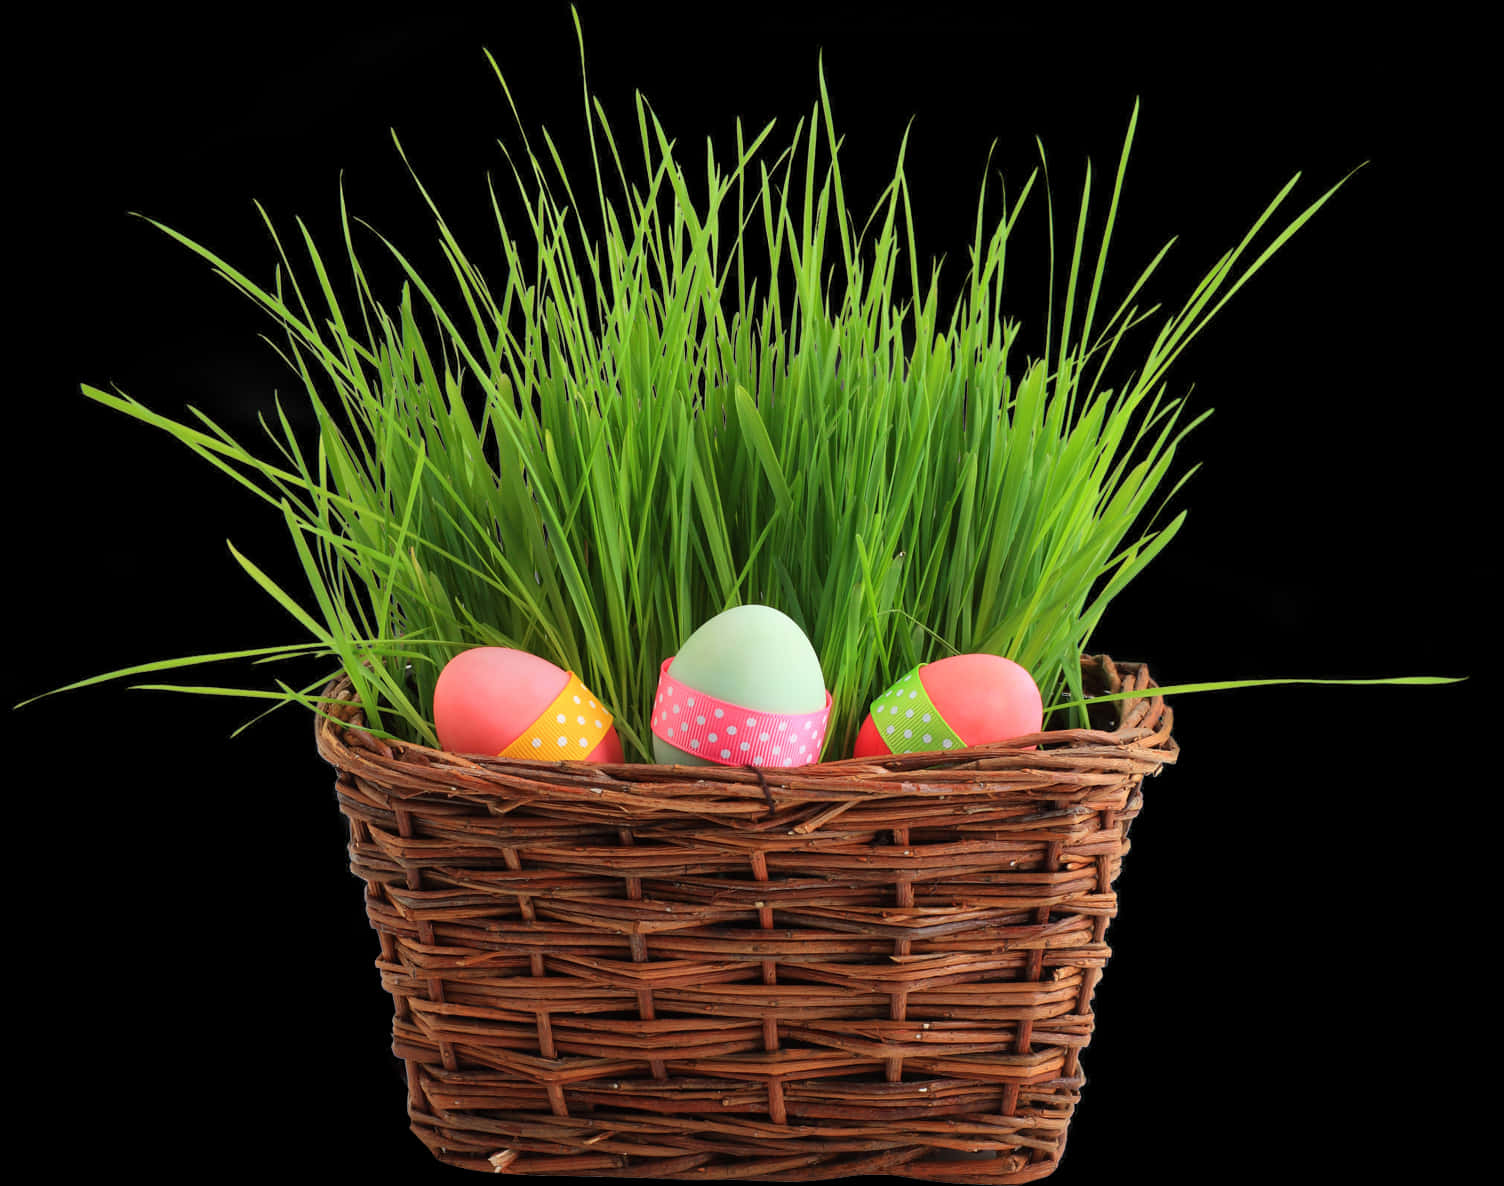 A Basket With Grass And Eggs